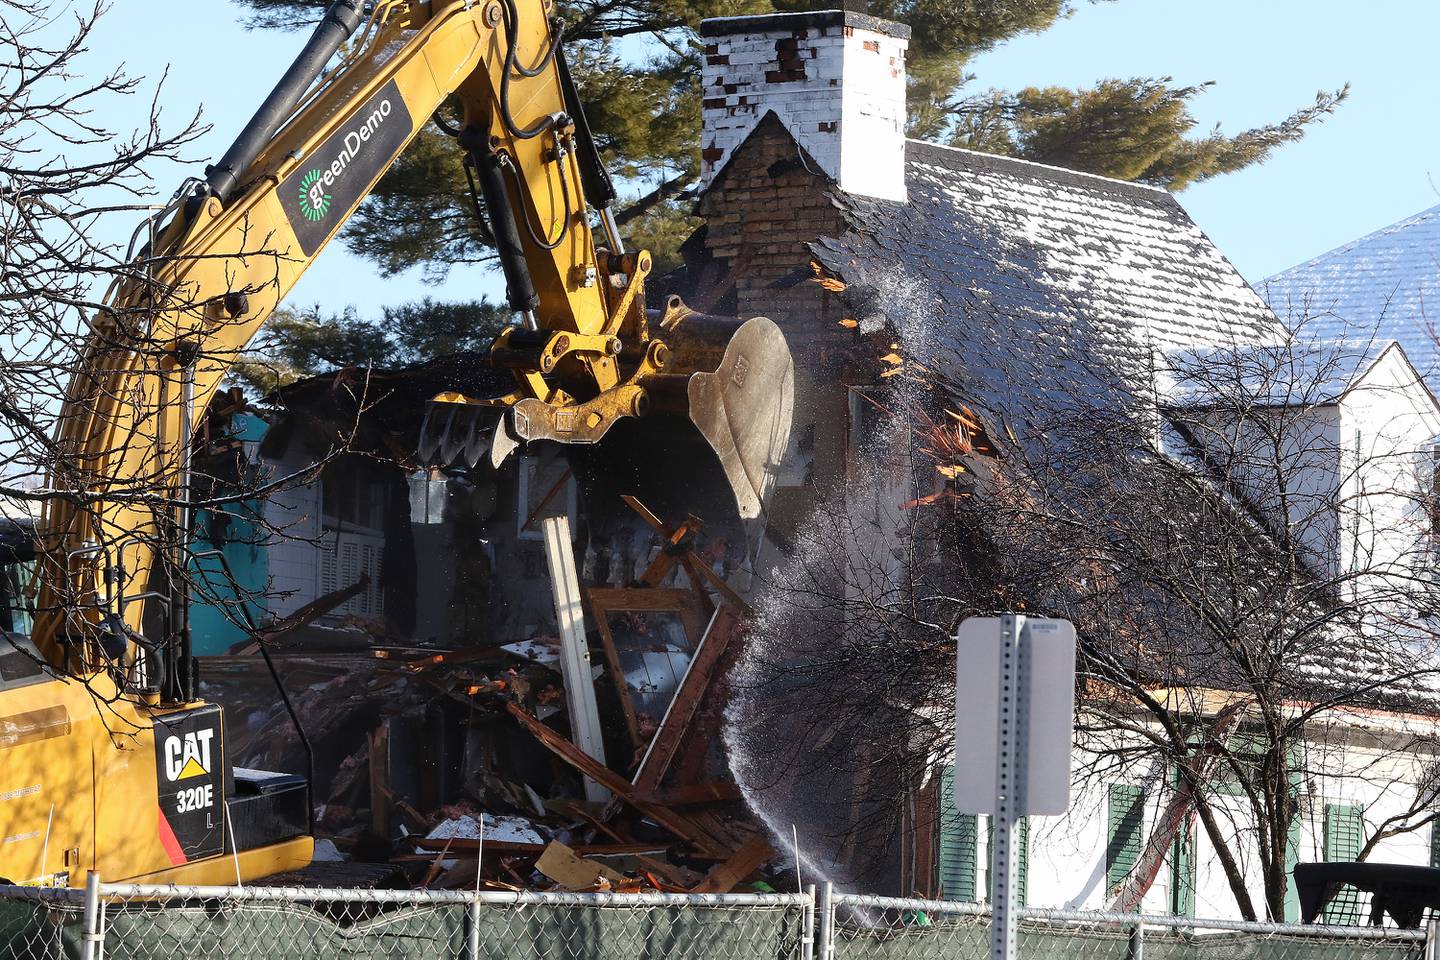 Green Demolition crews work on Wednesday, March 4, 2020 on tearing down the former home of Andrew Freund and Joann Cunningham at 94 Dole Ave, where they allegedly murdered their 5-year-old son, AJ Freund, back in April, 2019.